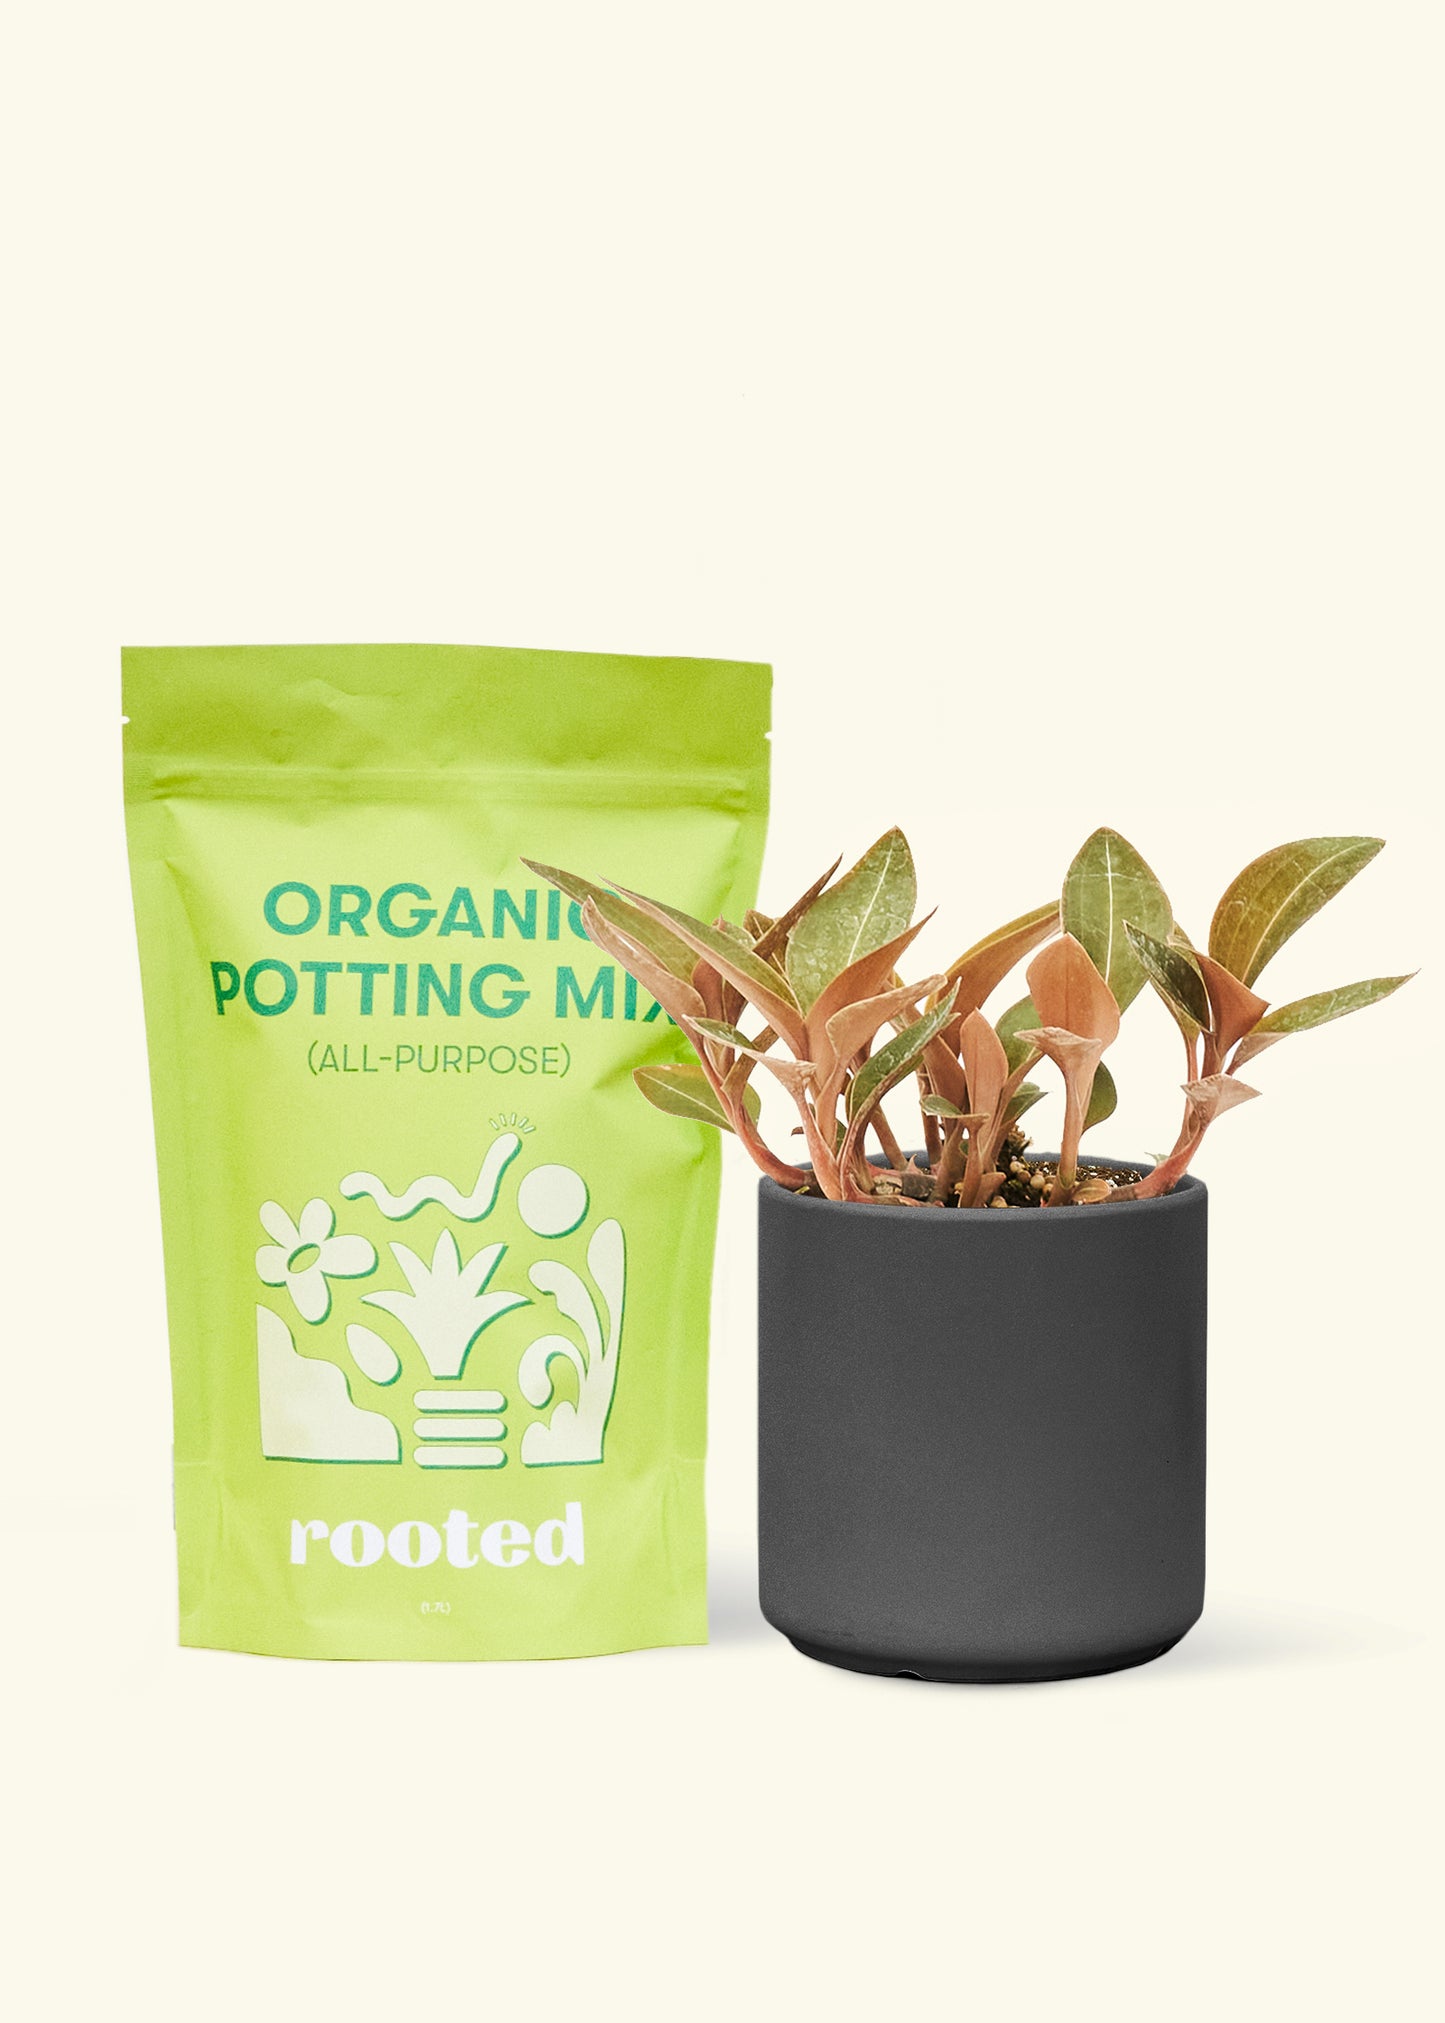 Small Black Jewel Orchid (Ludisia discolor) in a black cylinder pot and a bag of soil.